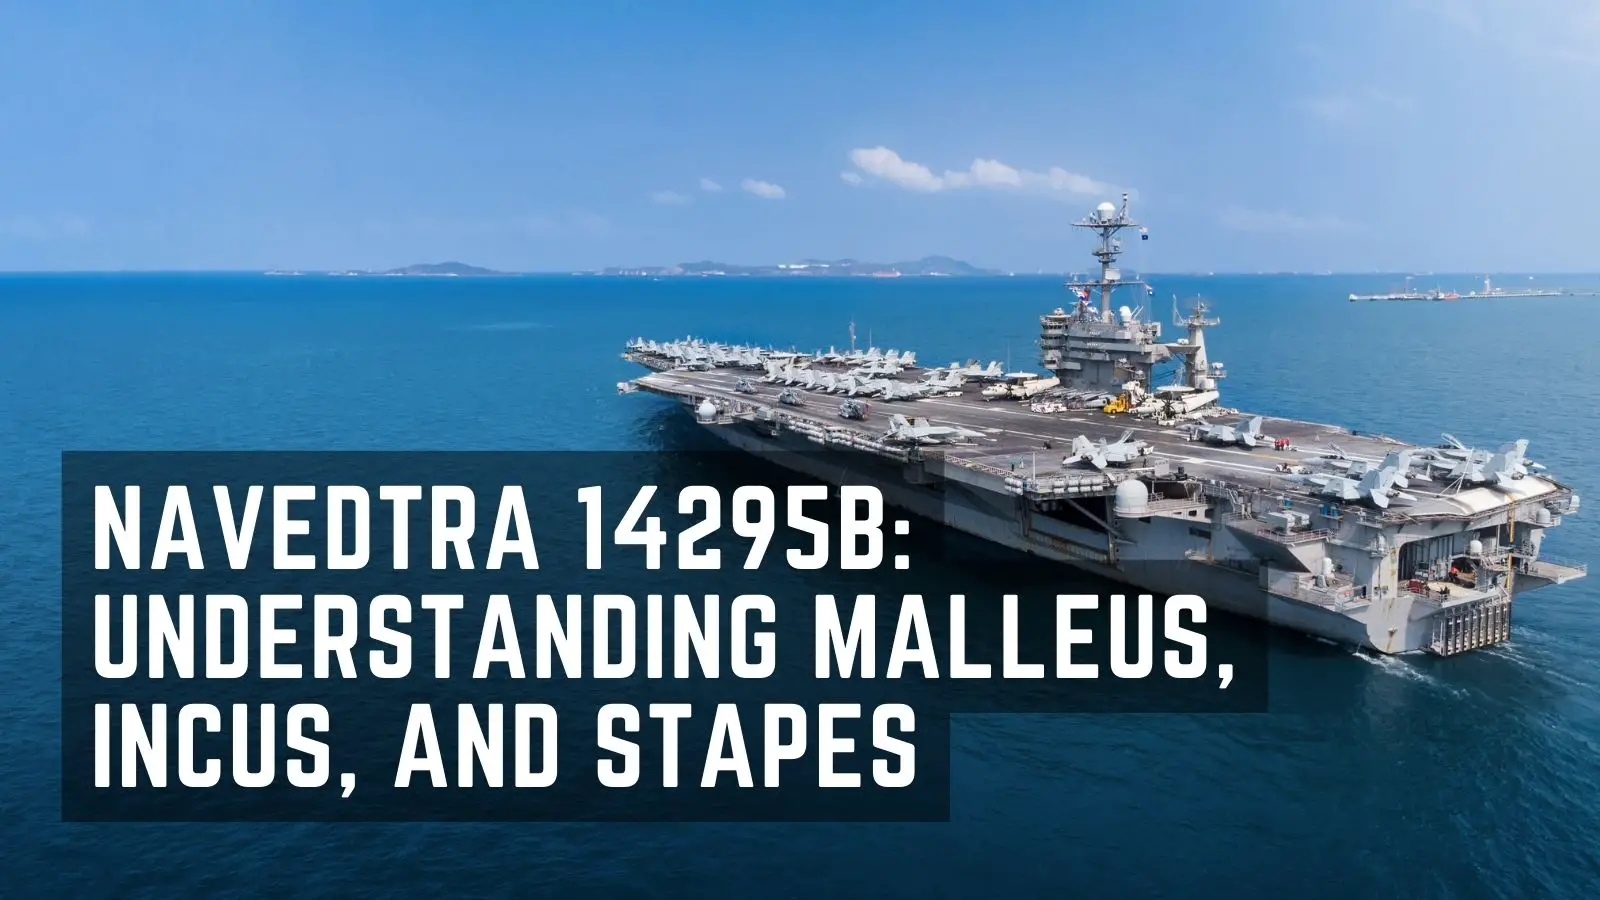 Navedtra 14295B understanding malleus, incus, and stapes - militaryguidecentral.com